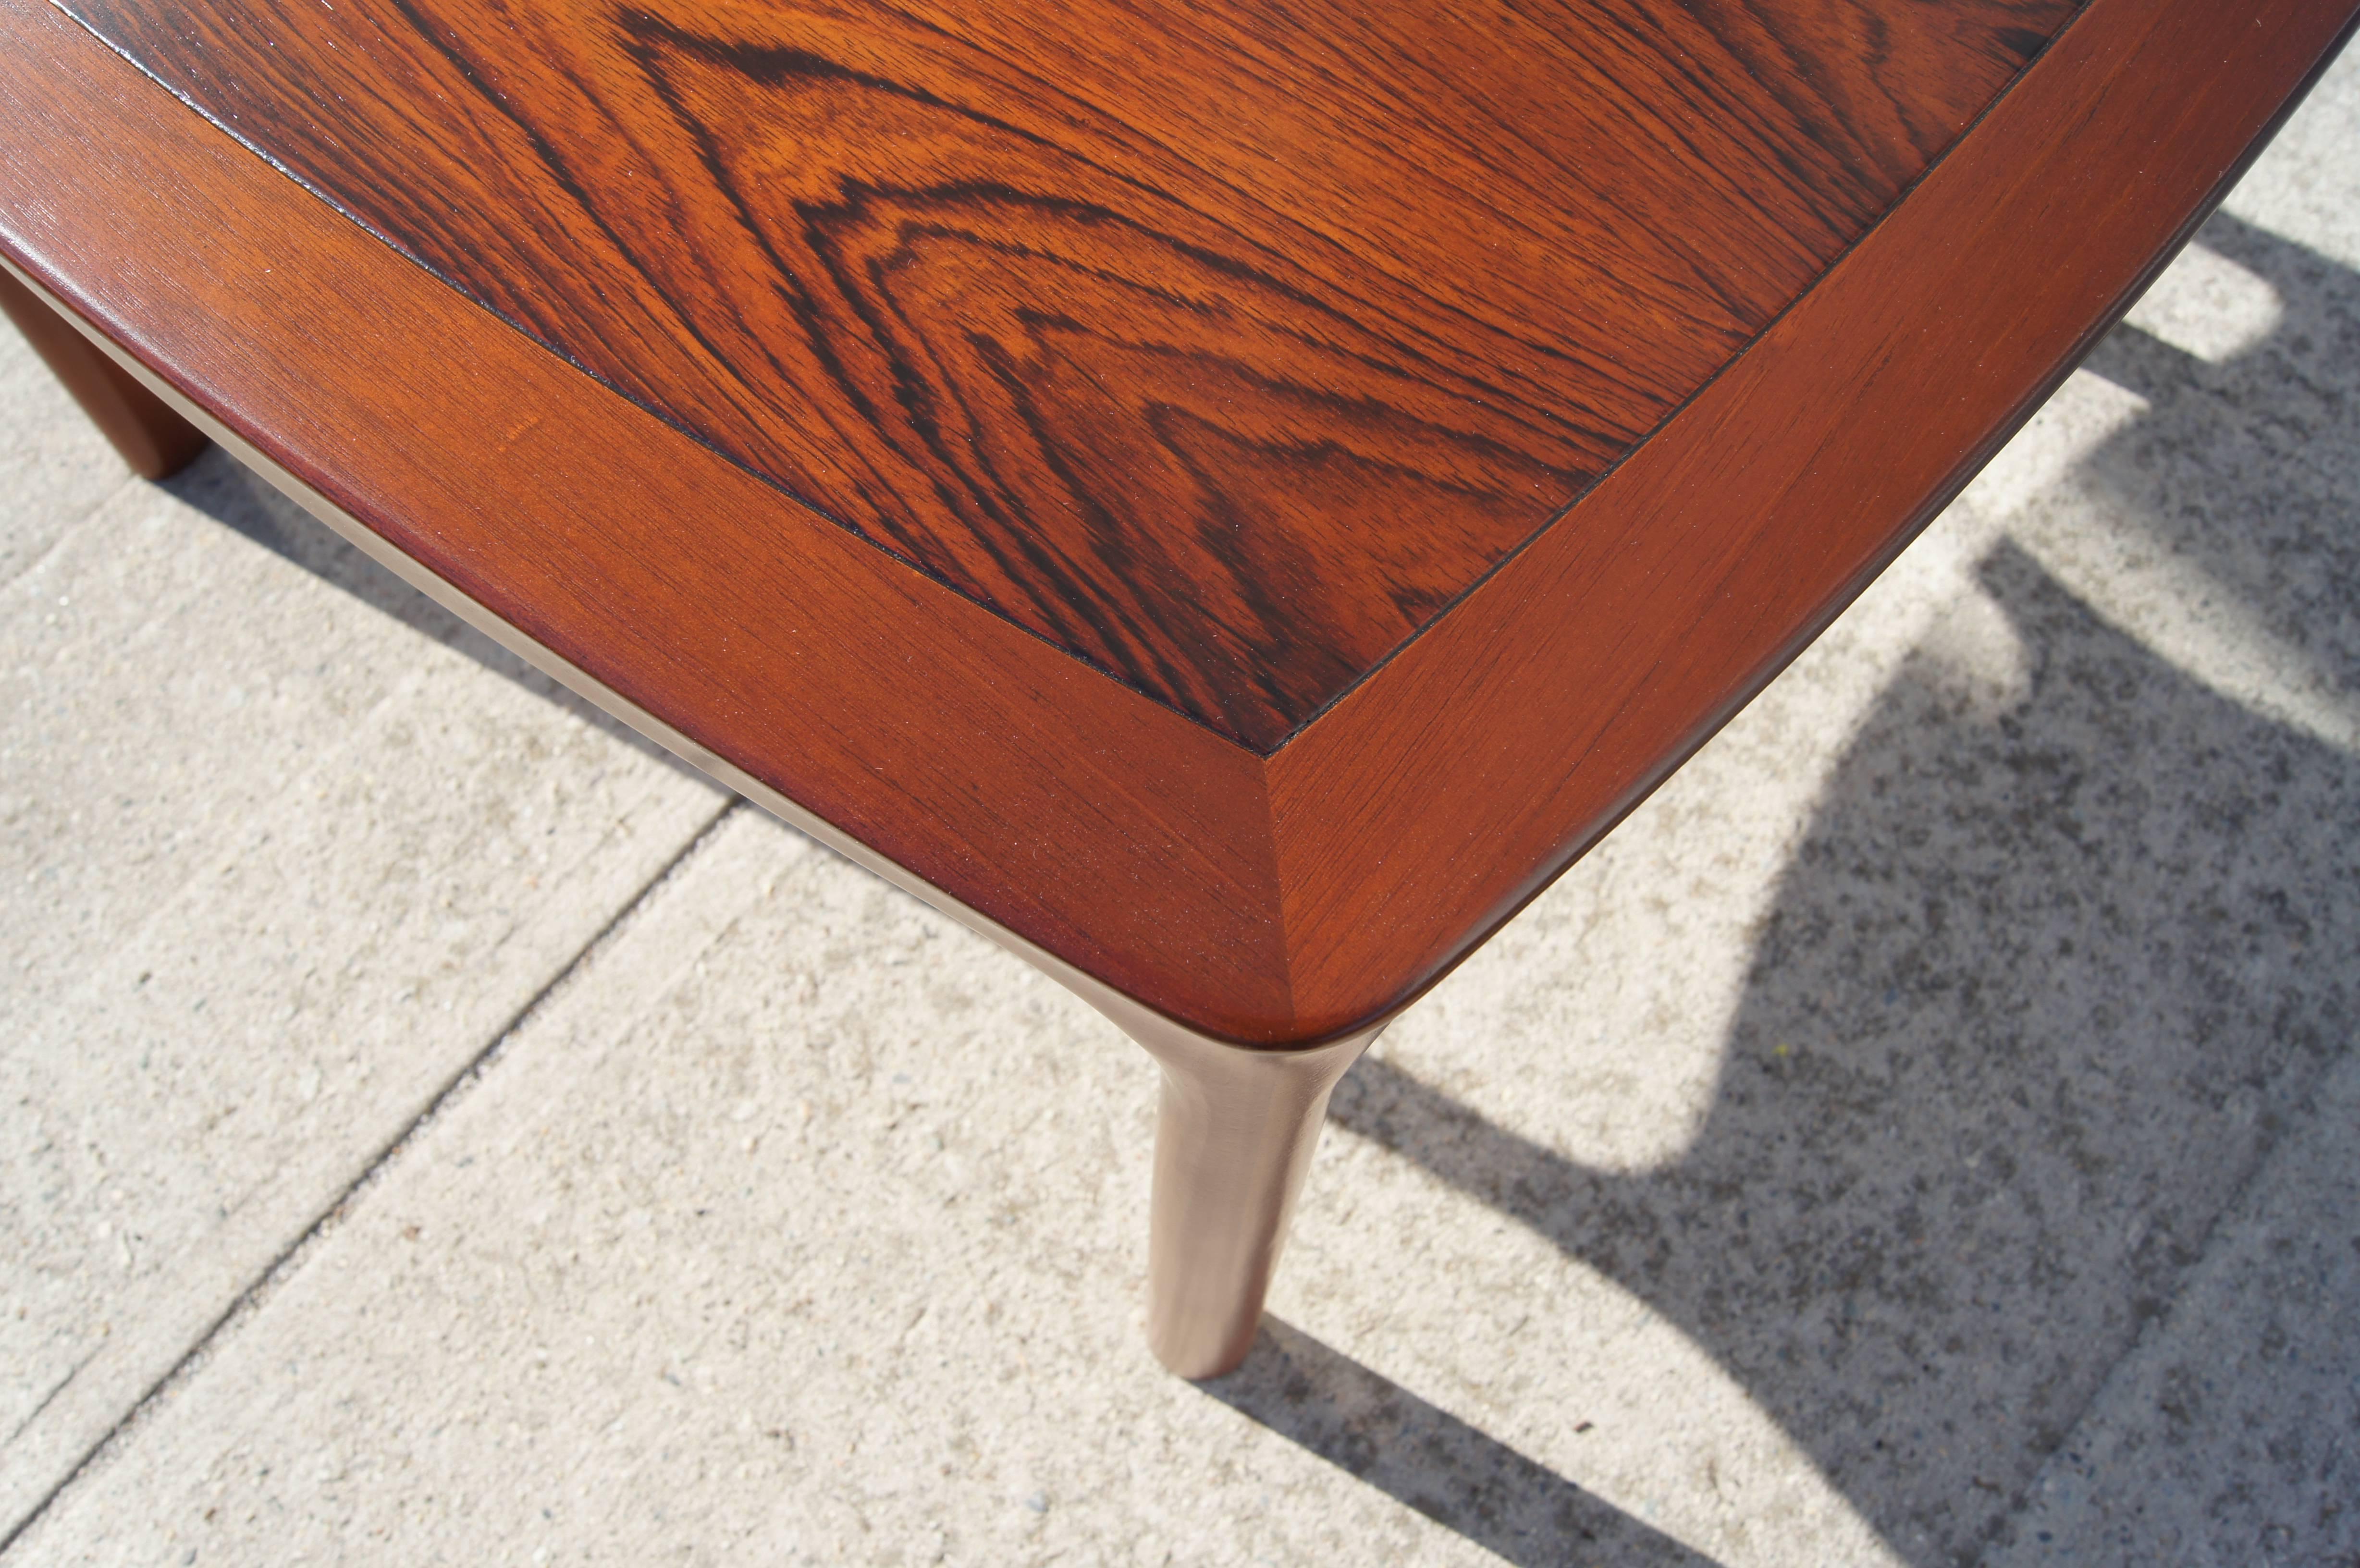 20th Century Rosewood and Mahogany Side Table by Edward Wormley for Dunbar For Sale